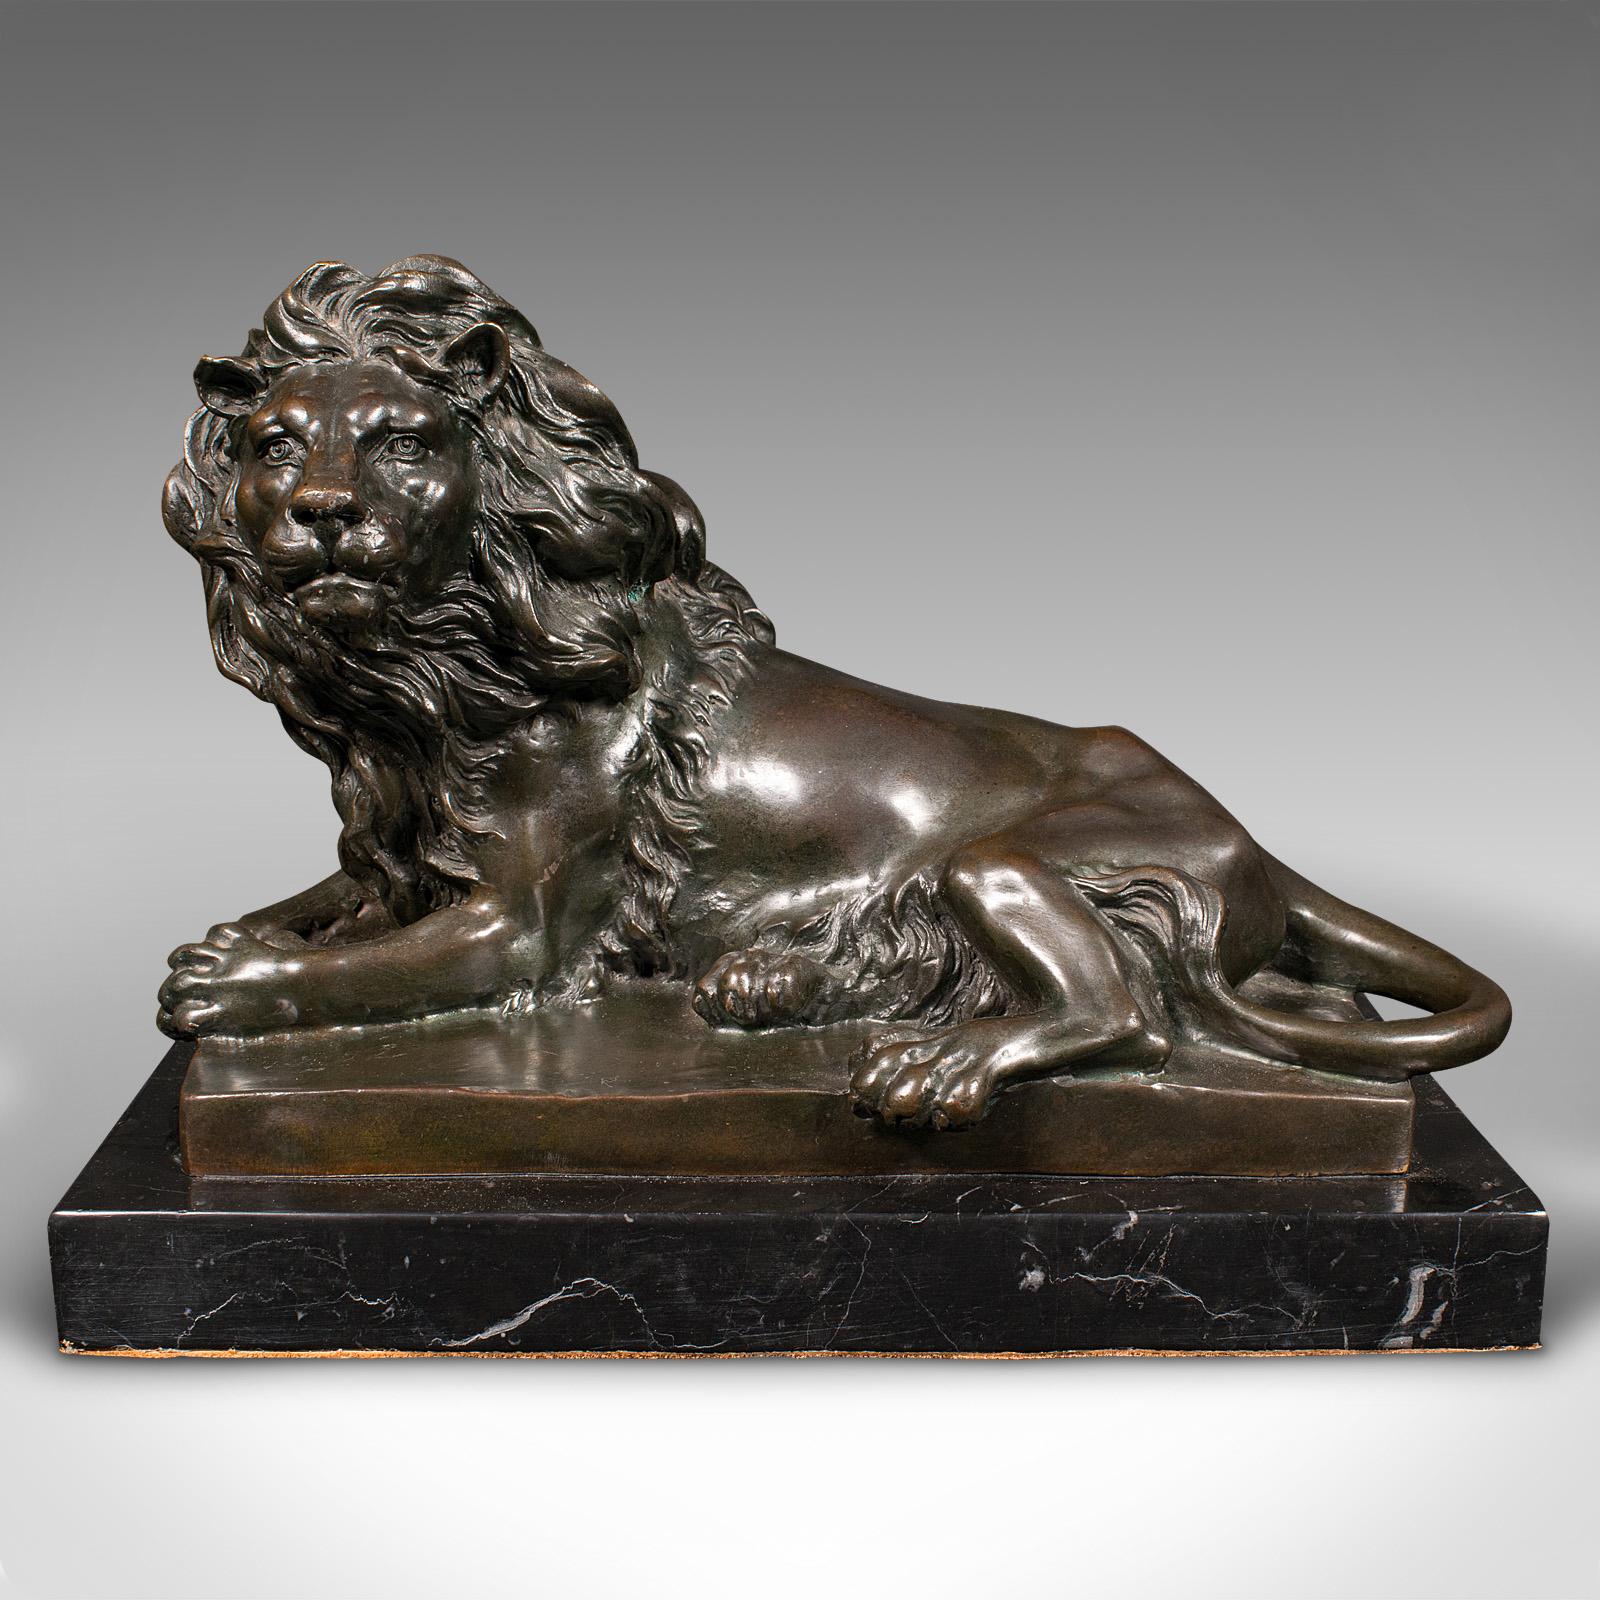 This is a vintage recumbent lion figure. A Continental, bronze animal sculpture after Antoine-Louis Barye, dating to the late 20th century, circa 1970.

Superb detail accentuates this substantial lion figure
Displays a desirable aged patina and in